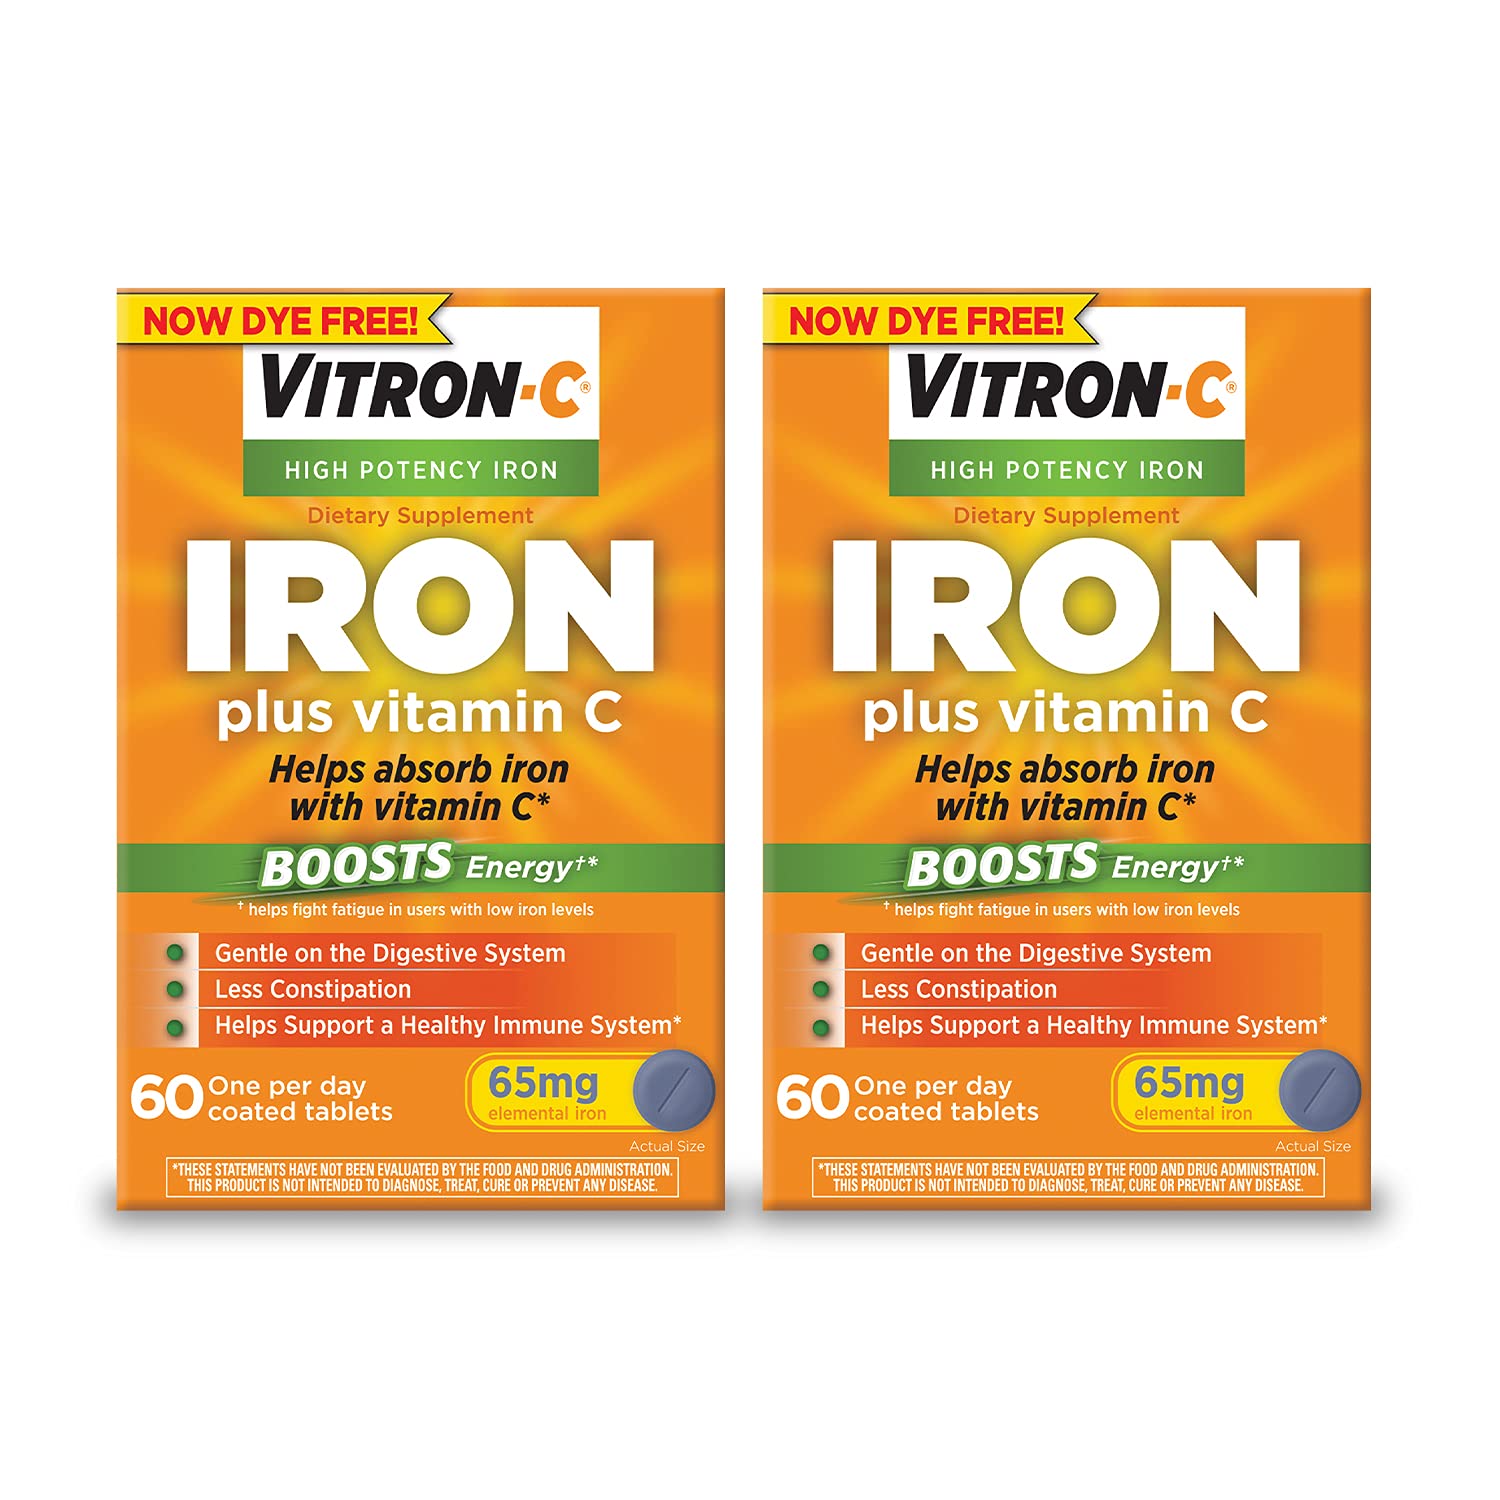 Vitron-C Iron Supplement, Once Daily, High Potency Iron Plus Vitamin C & Iron Supplement & Immune Support